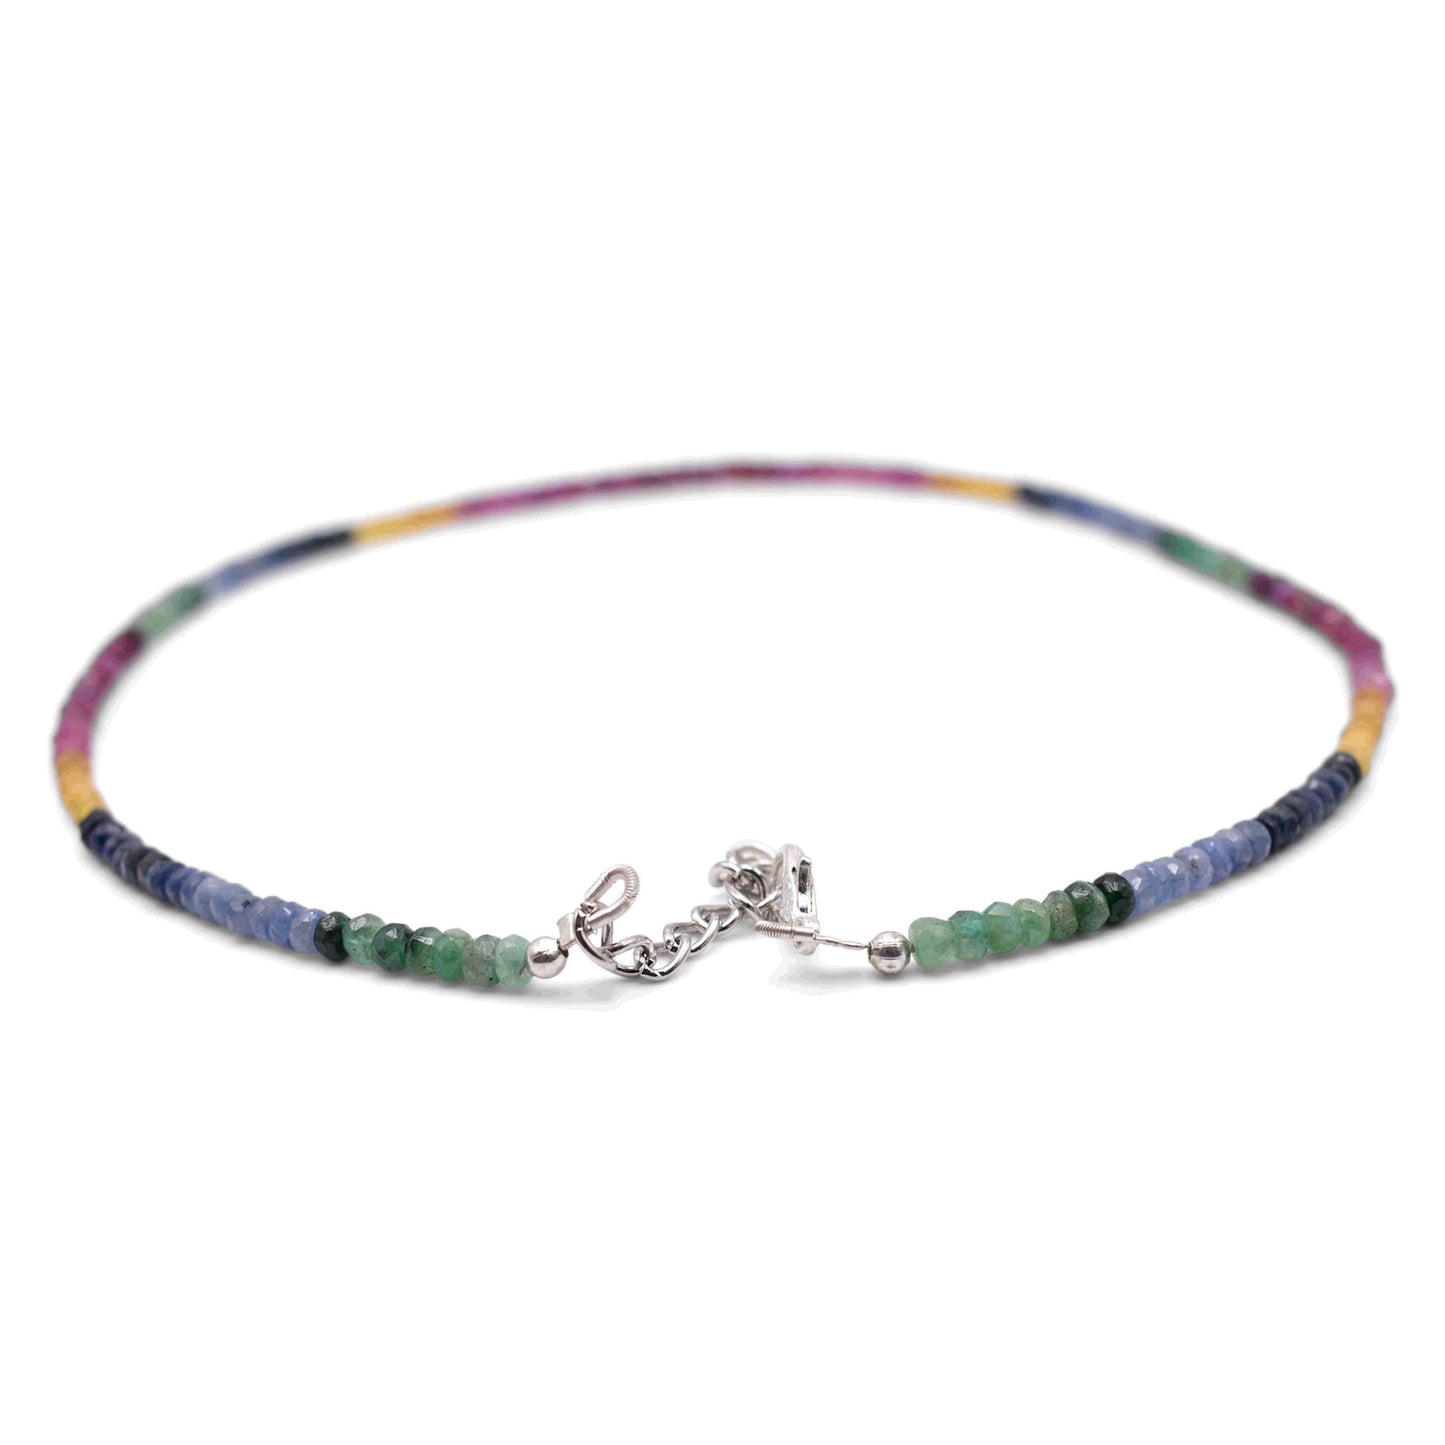 Emerald, Ruby, Sapphire Faceted Cut Stone Necklace - Mystic Gleam